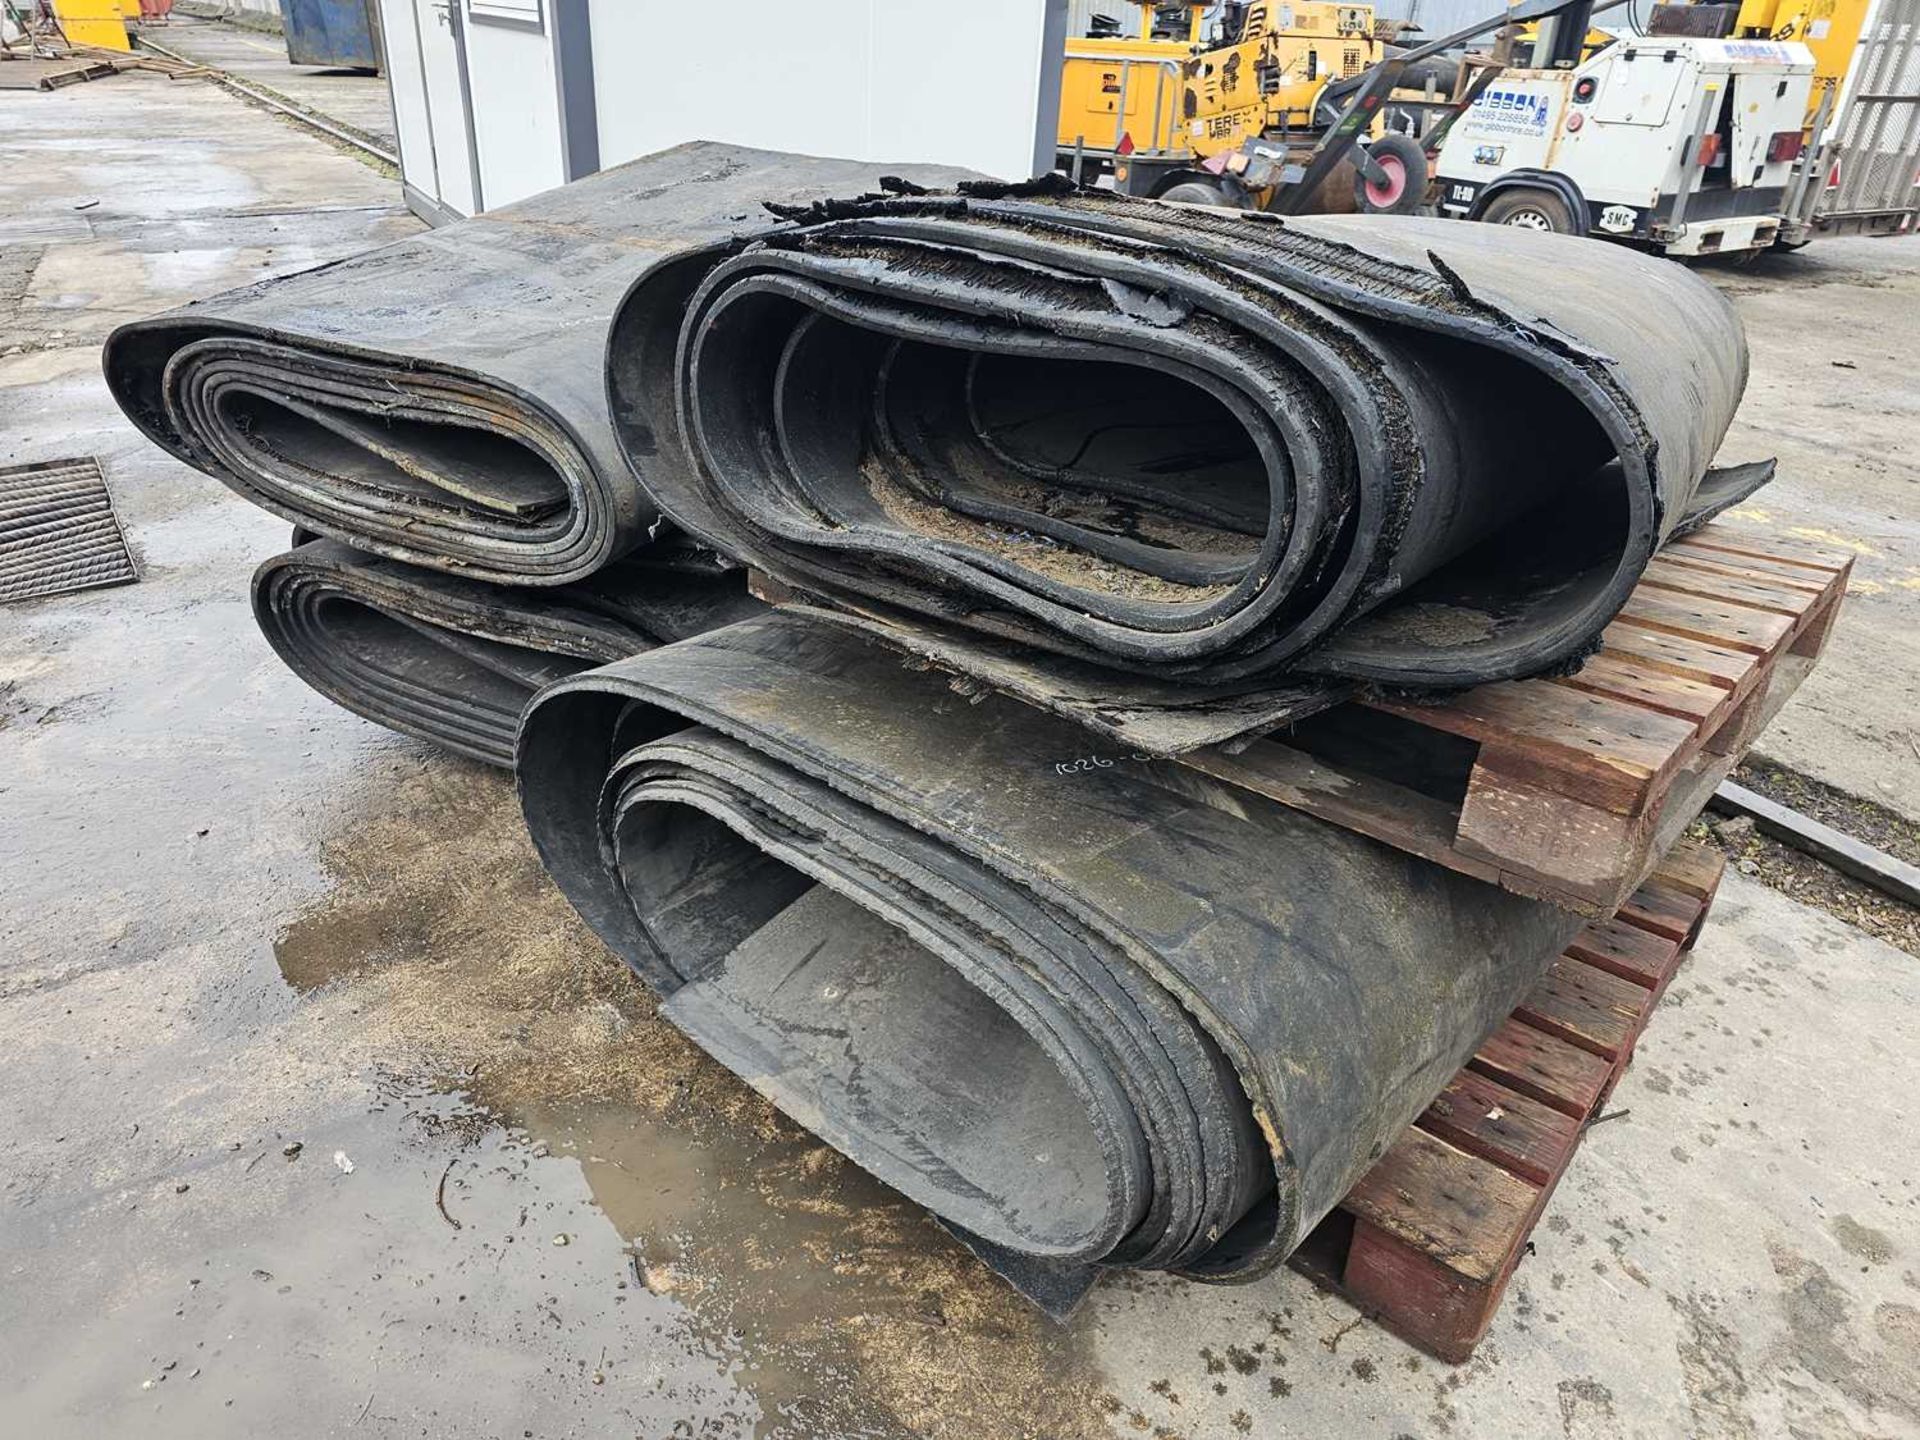 Roll of Rubber Conveyor Belting (4 of)